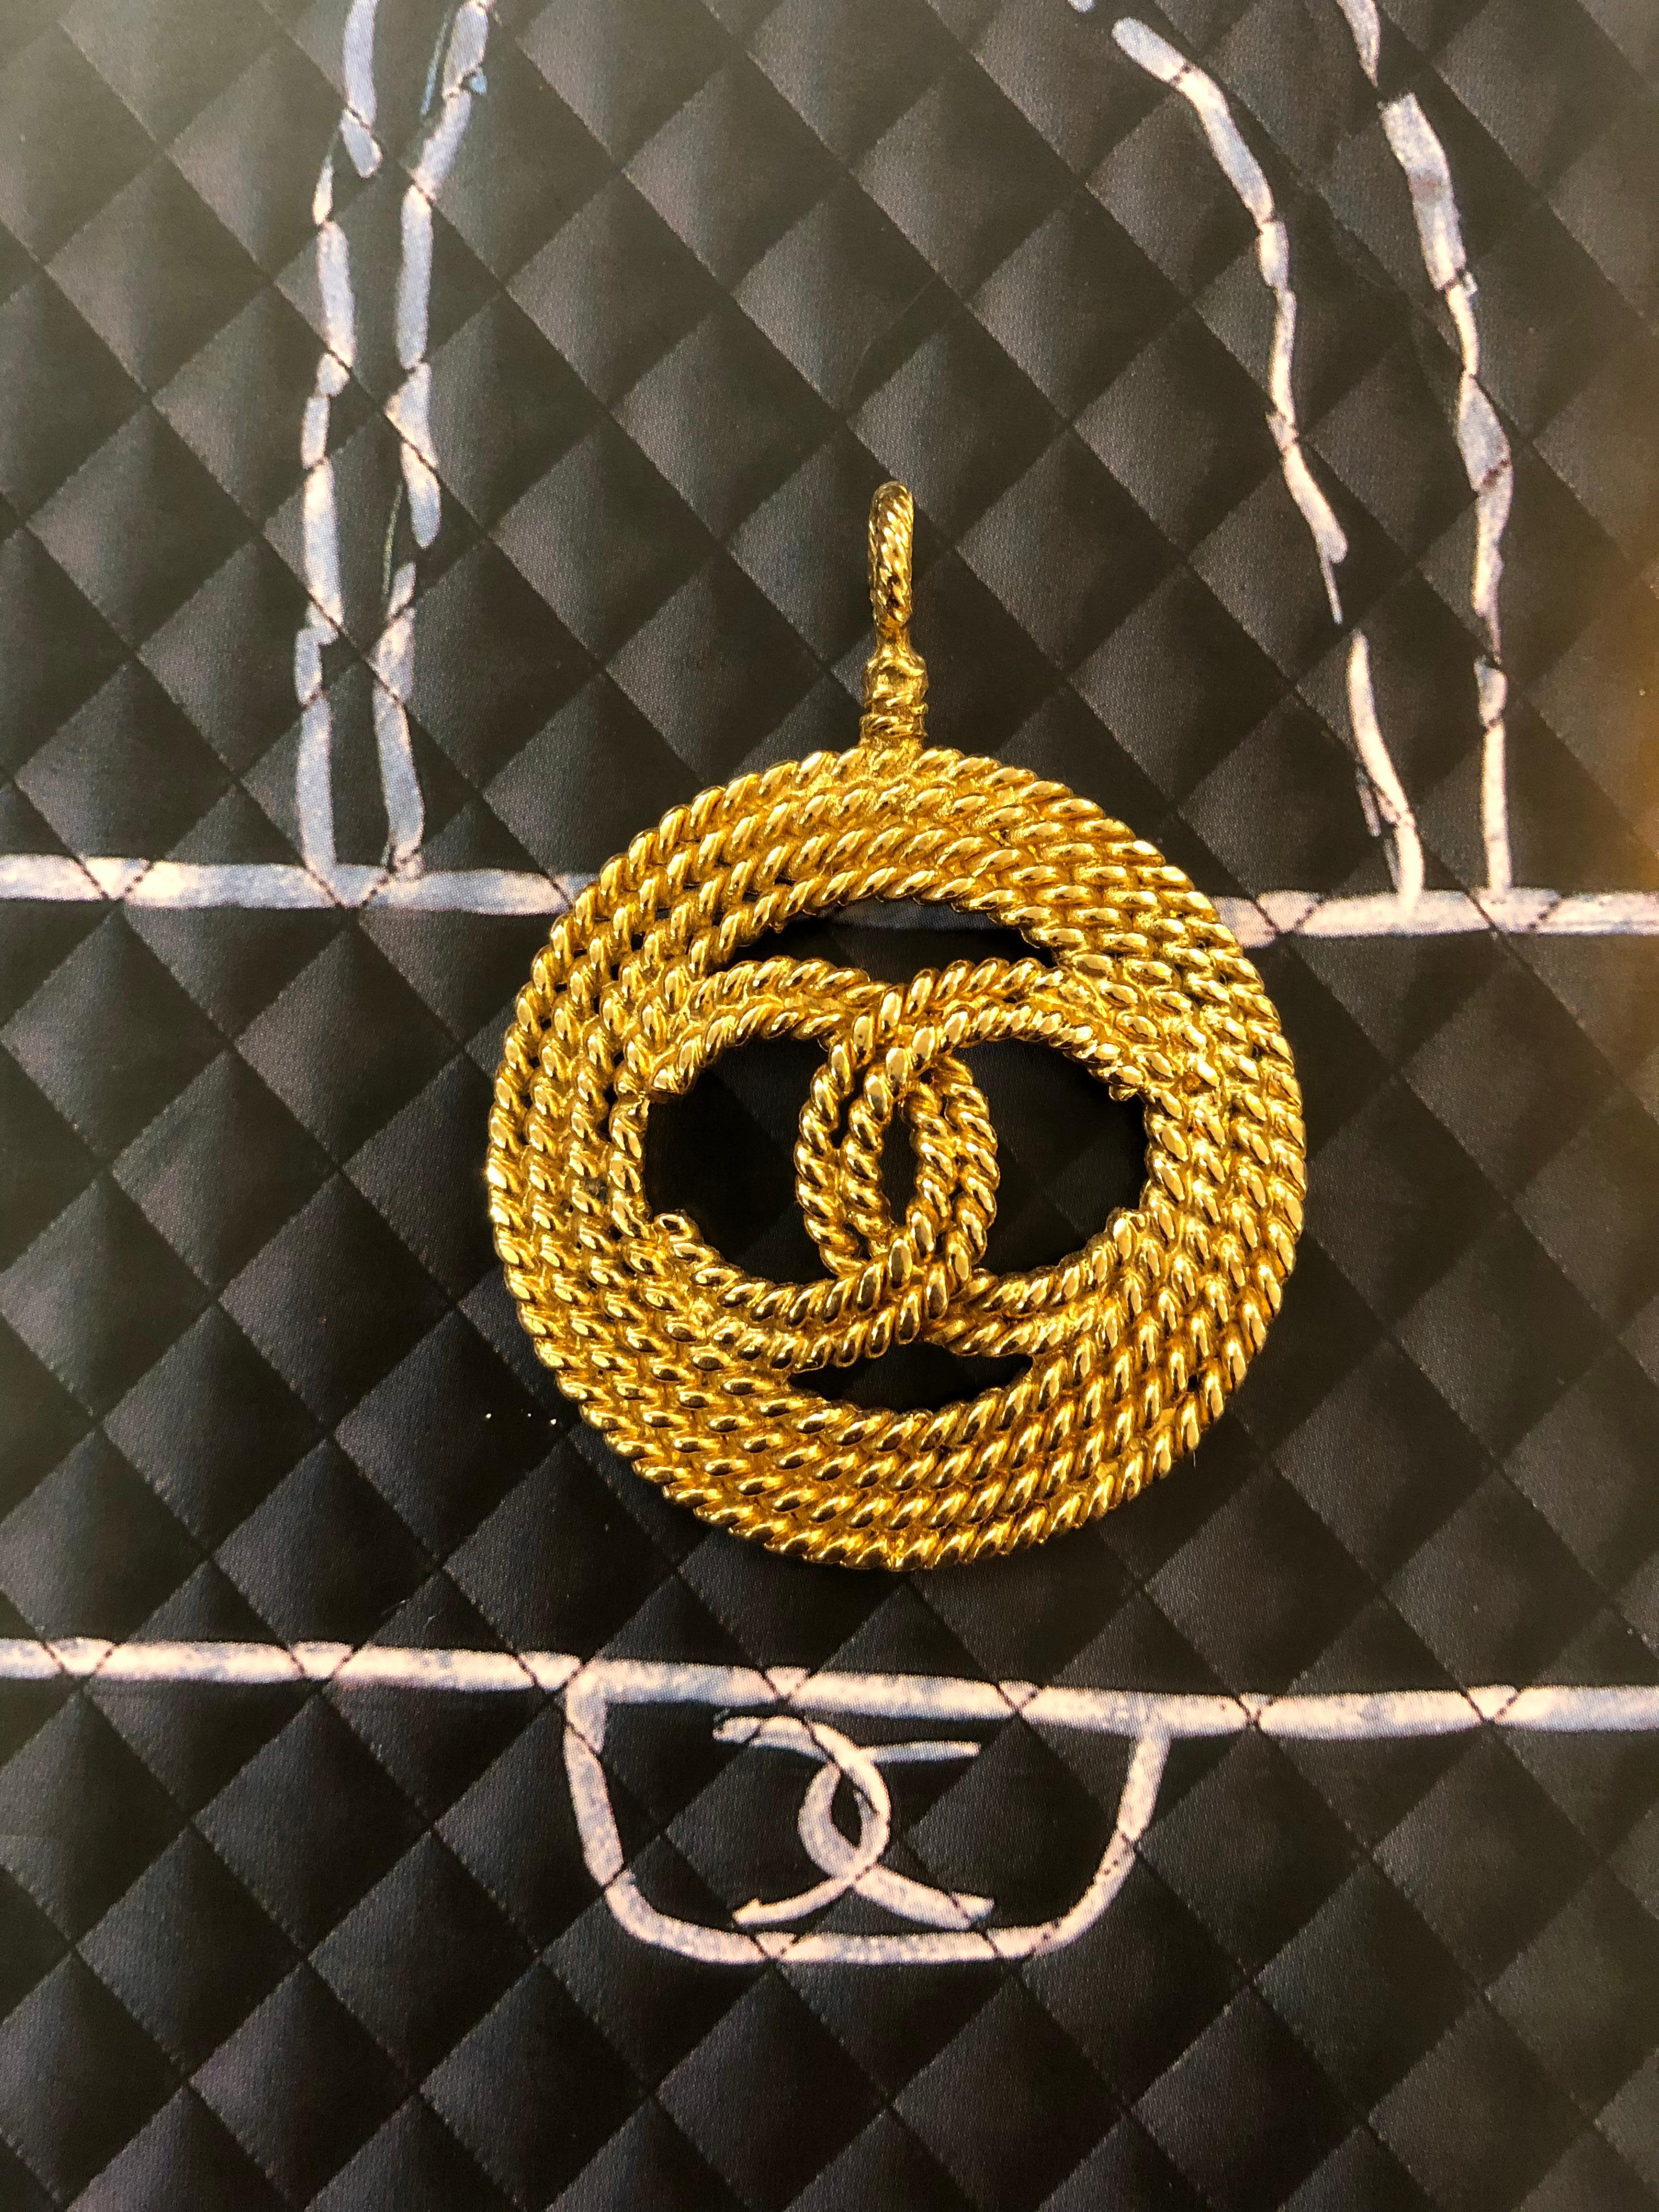 1990s Chanel pendant featuring a gold toned CC surrounded by triple gold toned metal in rope pattern. Stamped Chanel 28 made in France. Measures 4.9 x 6.4 cm. This charm can be secured onto a pearl necklace as shown in the picture.

NOTE: The pearl